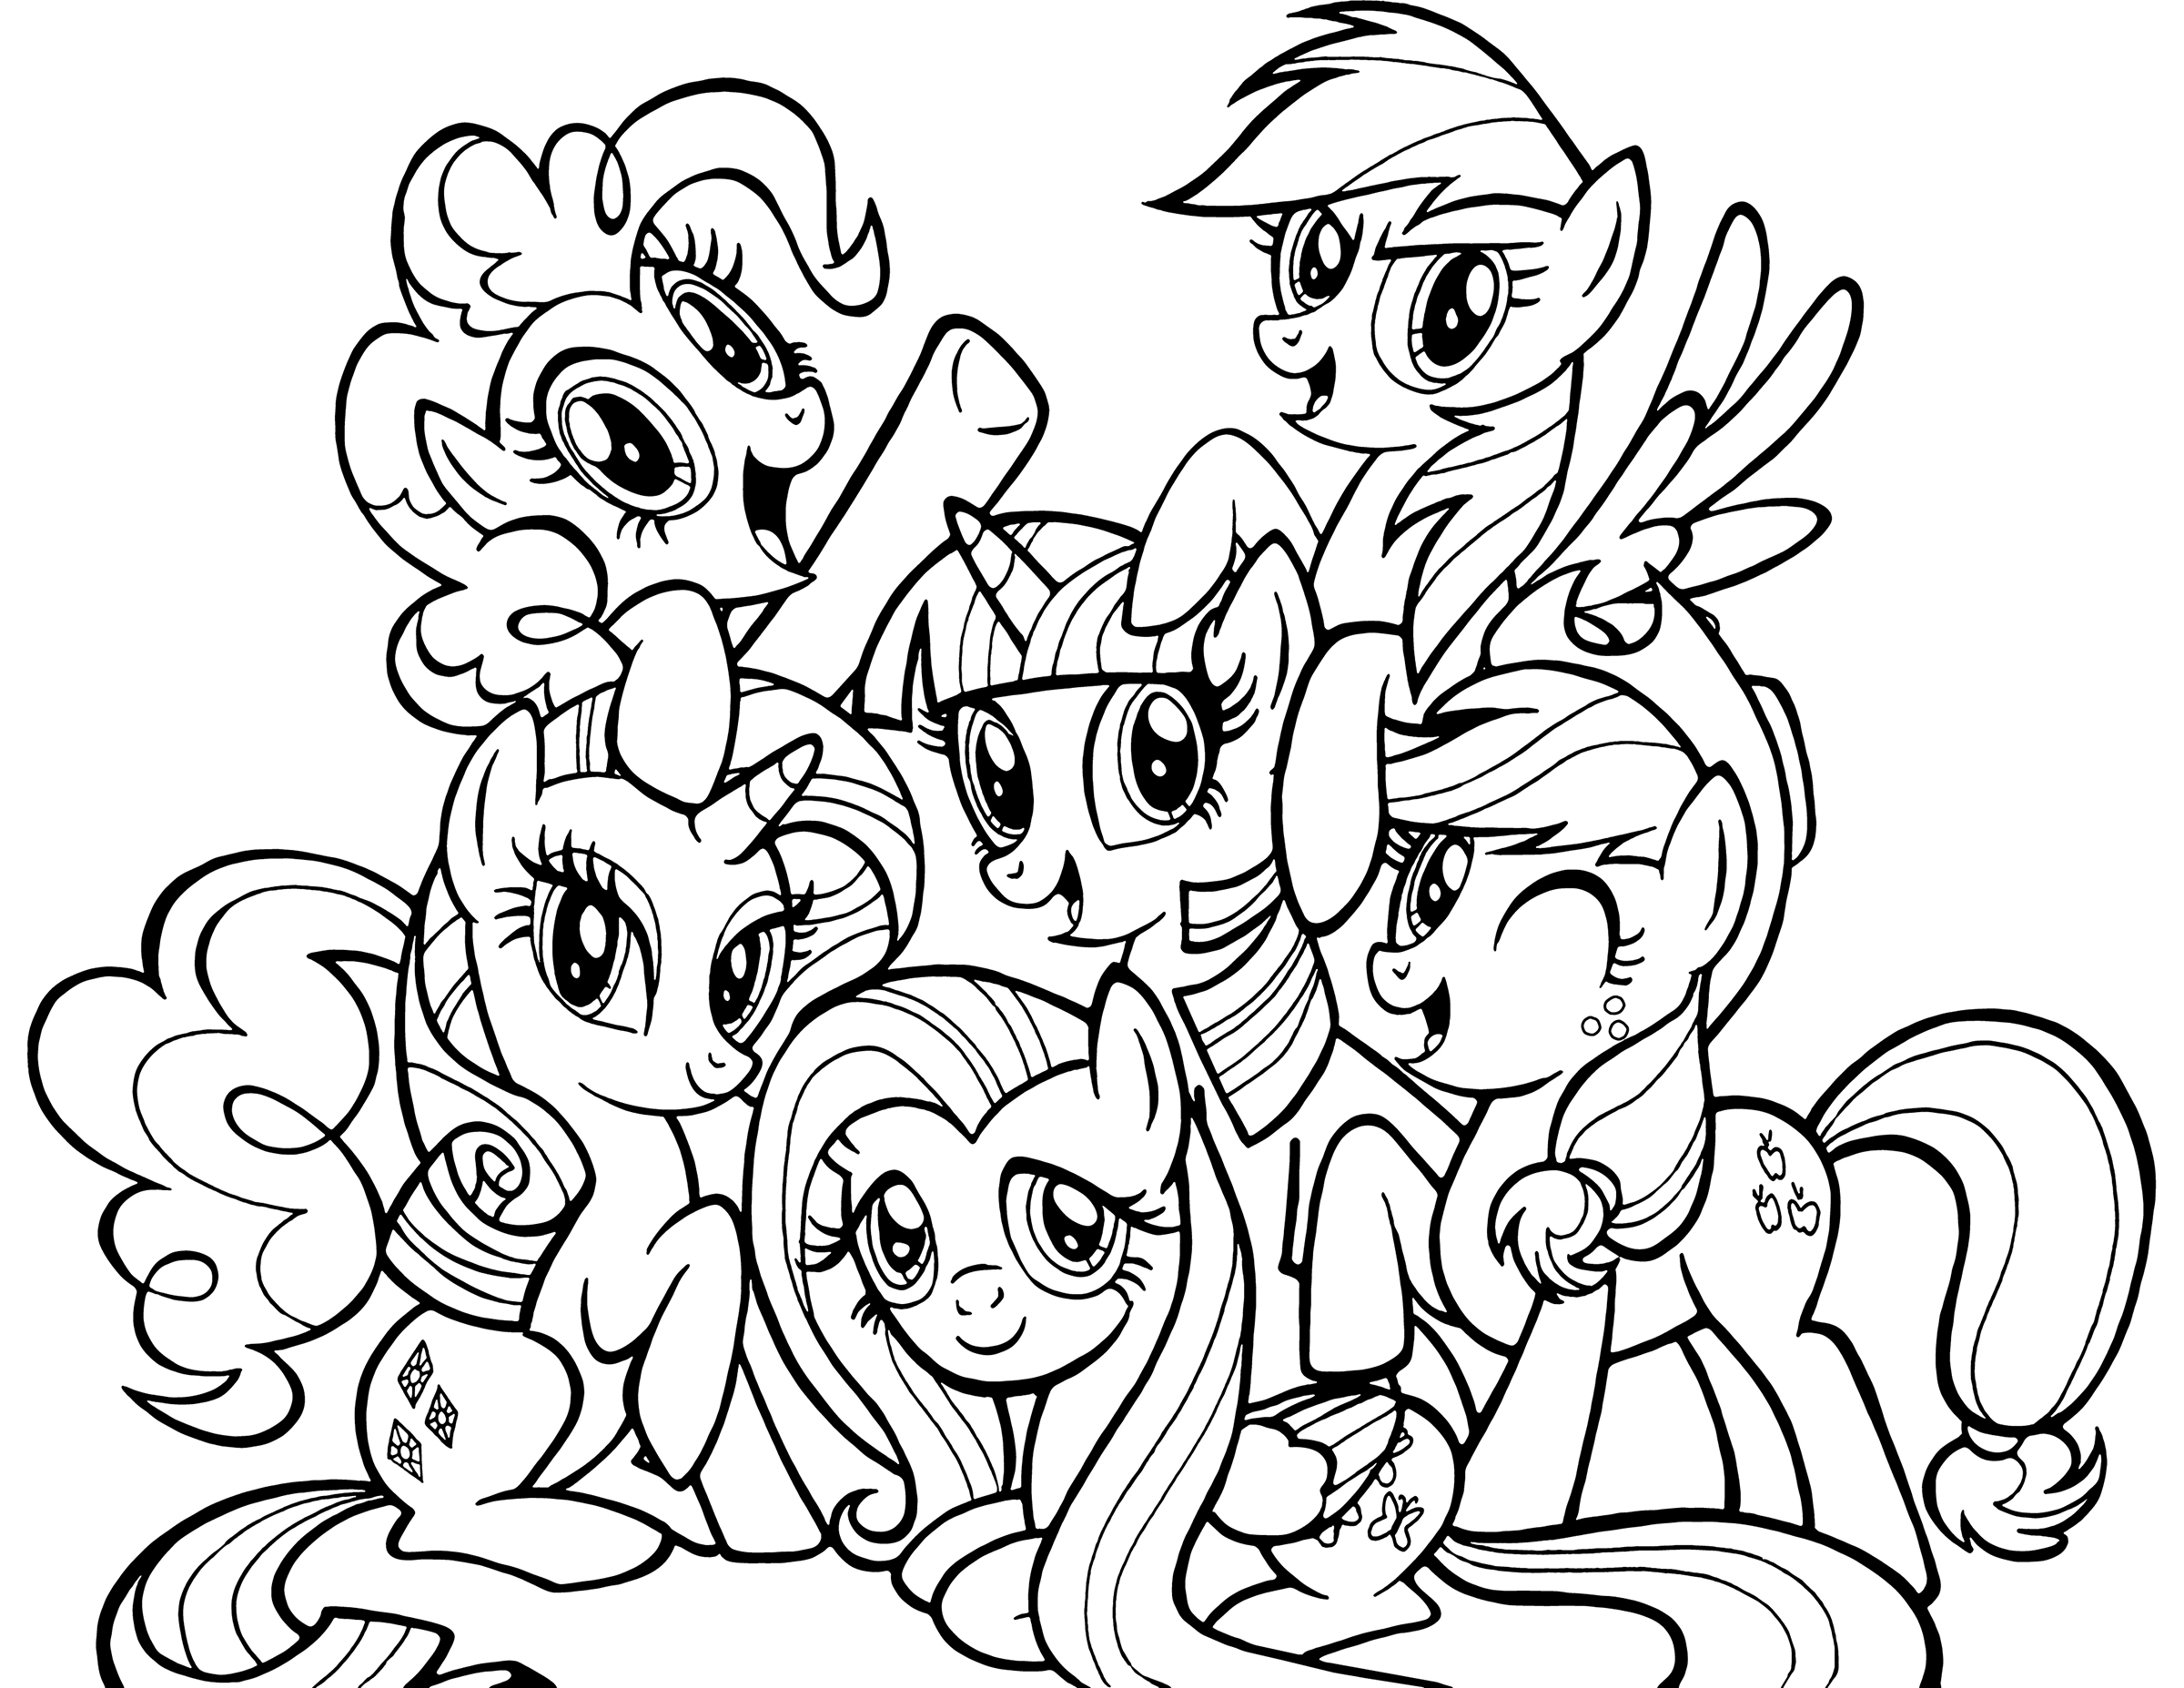 All My Little Pony Characters Coloring Pages / My Little Pony Coloring